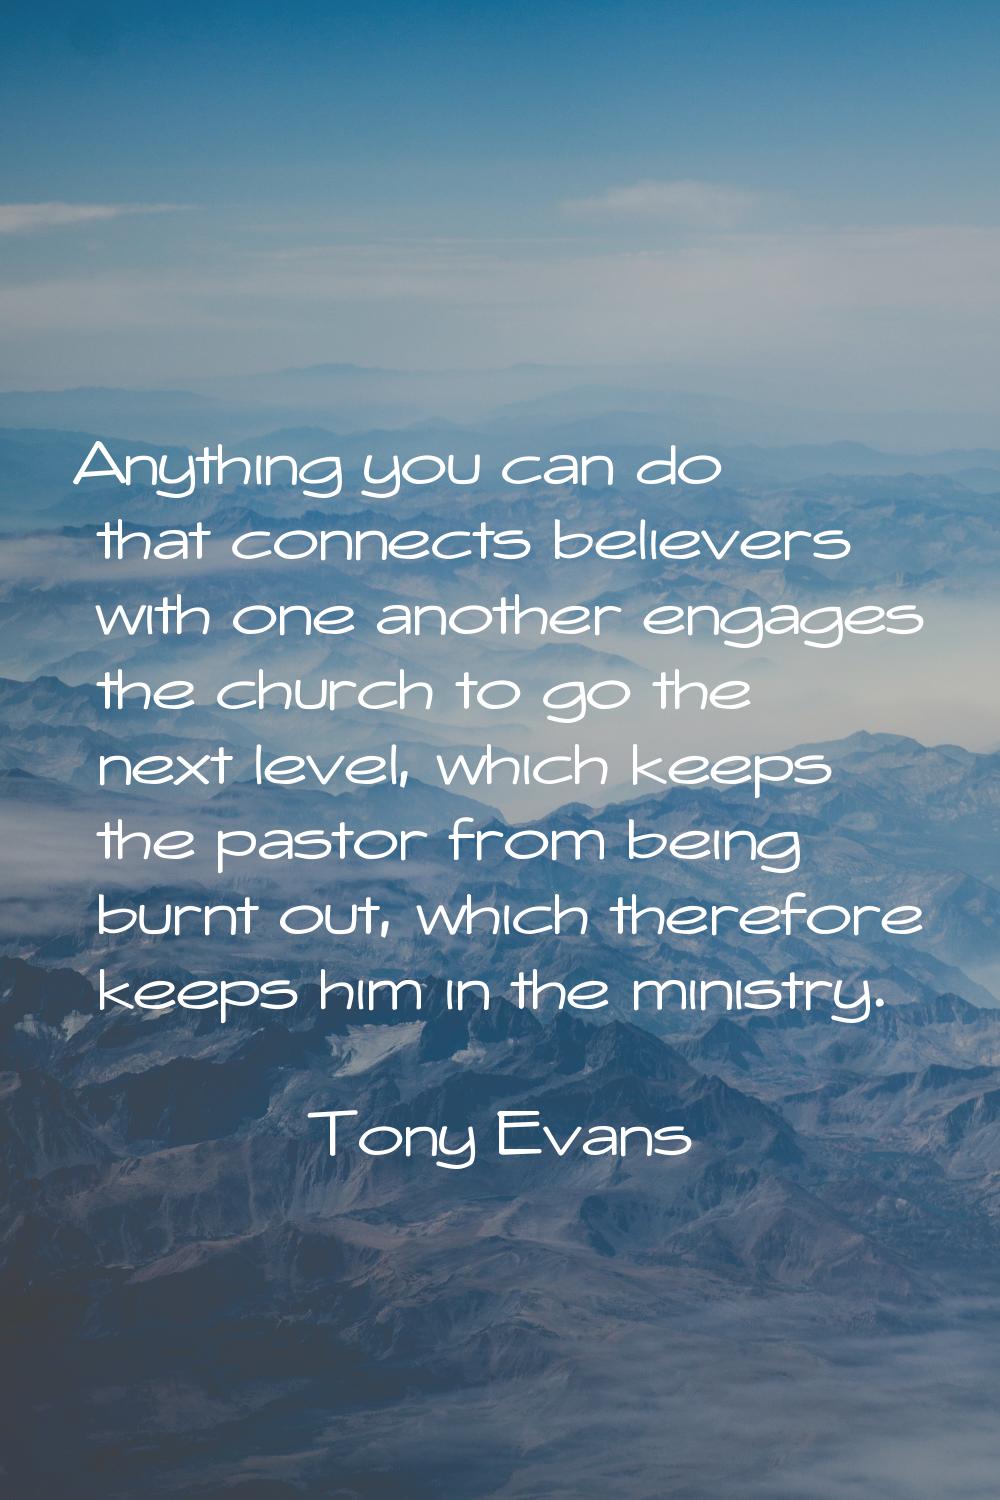 Anything you can do that connects believers with one another engages the church to go the next leve